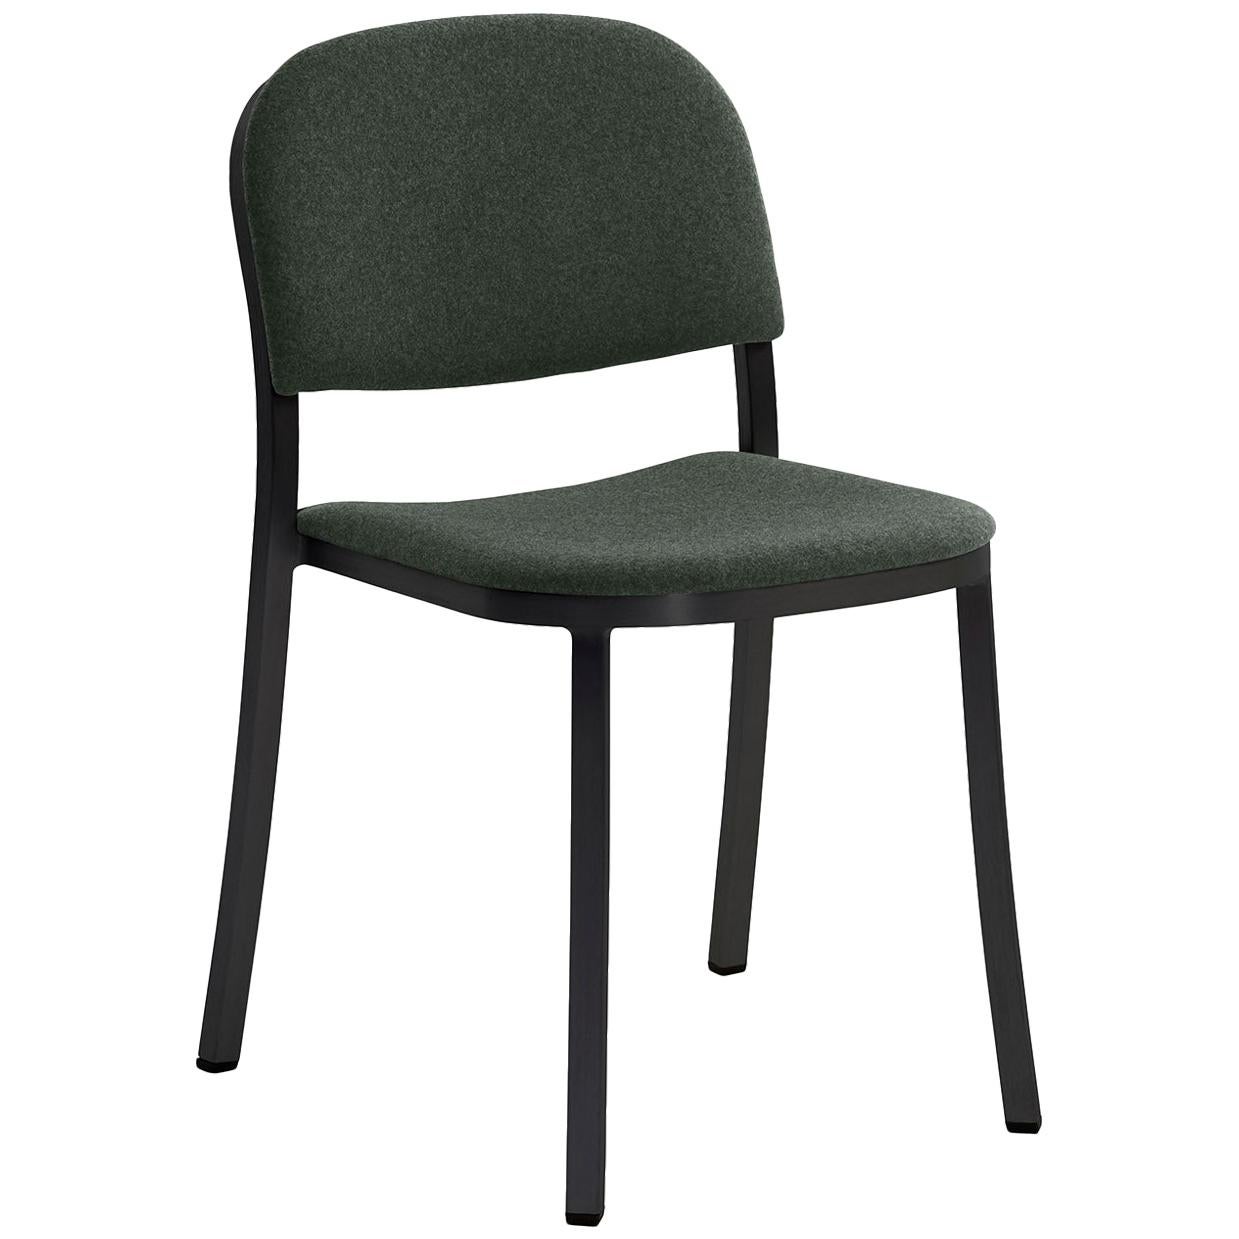 Emeco 1 Inch Stacking Chair with Black Legs & Green Fabric by Jasper Morrison